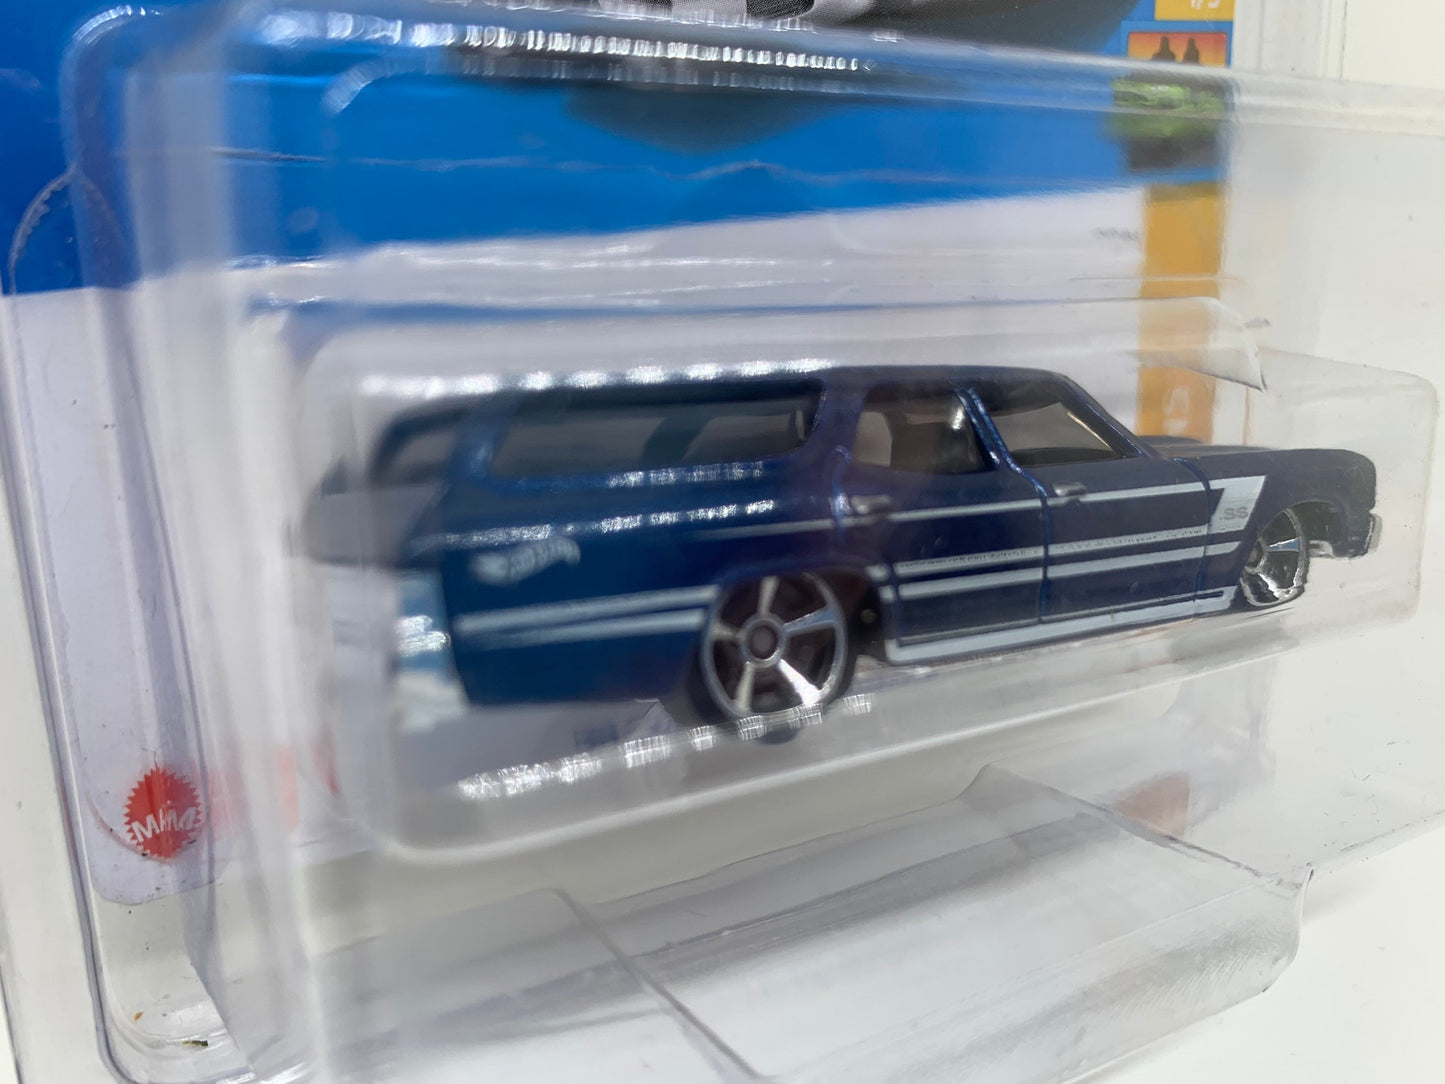 Hot Wheels '70 Chevelle SS Wagon Metalflake Dark Blue HW Wagons Perfect Birthday Gift Miniature Collectable Scale Model Toy Car